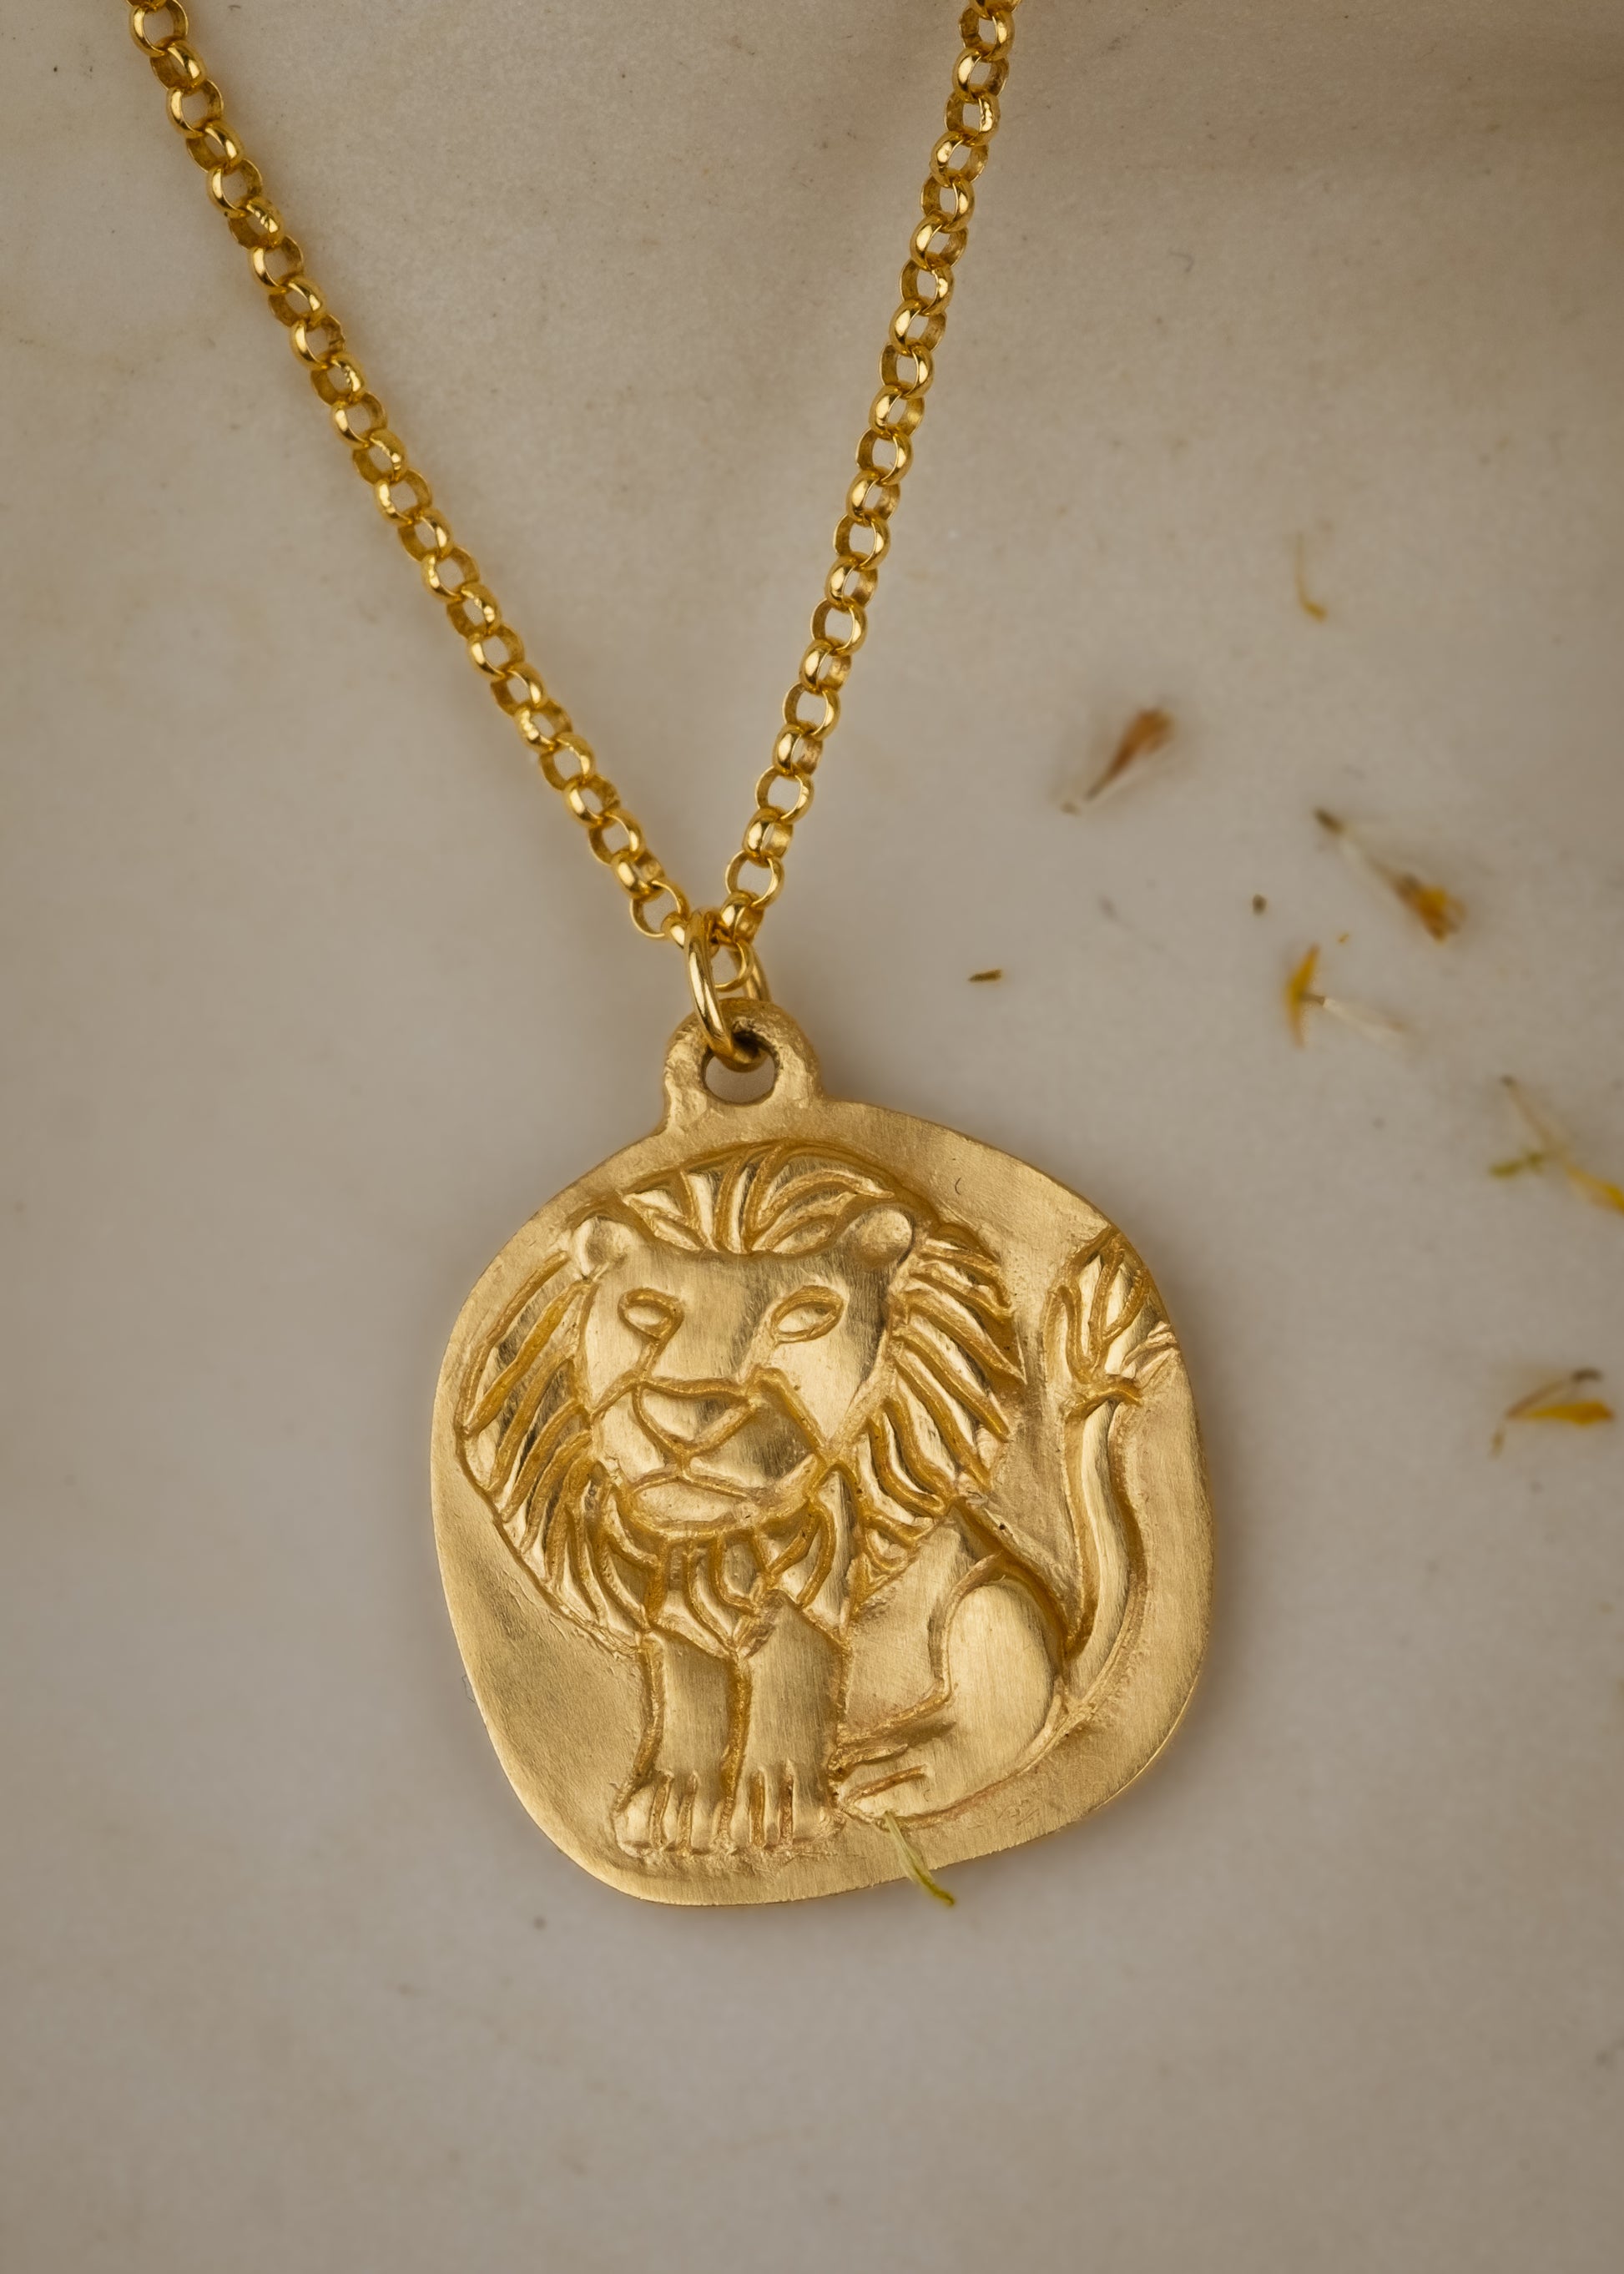 The fifth sign of the Zodiac, fire sign Leo is a natural leader, strong and creative in their approach to the world. A hand-carved, whimsical-yet-mighty little lion graces this pendant, creating a necklace that captures the power of the celestial sky. 